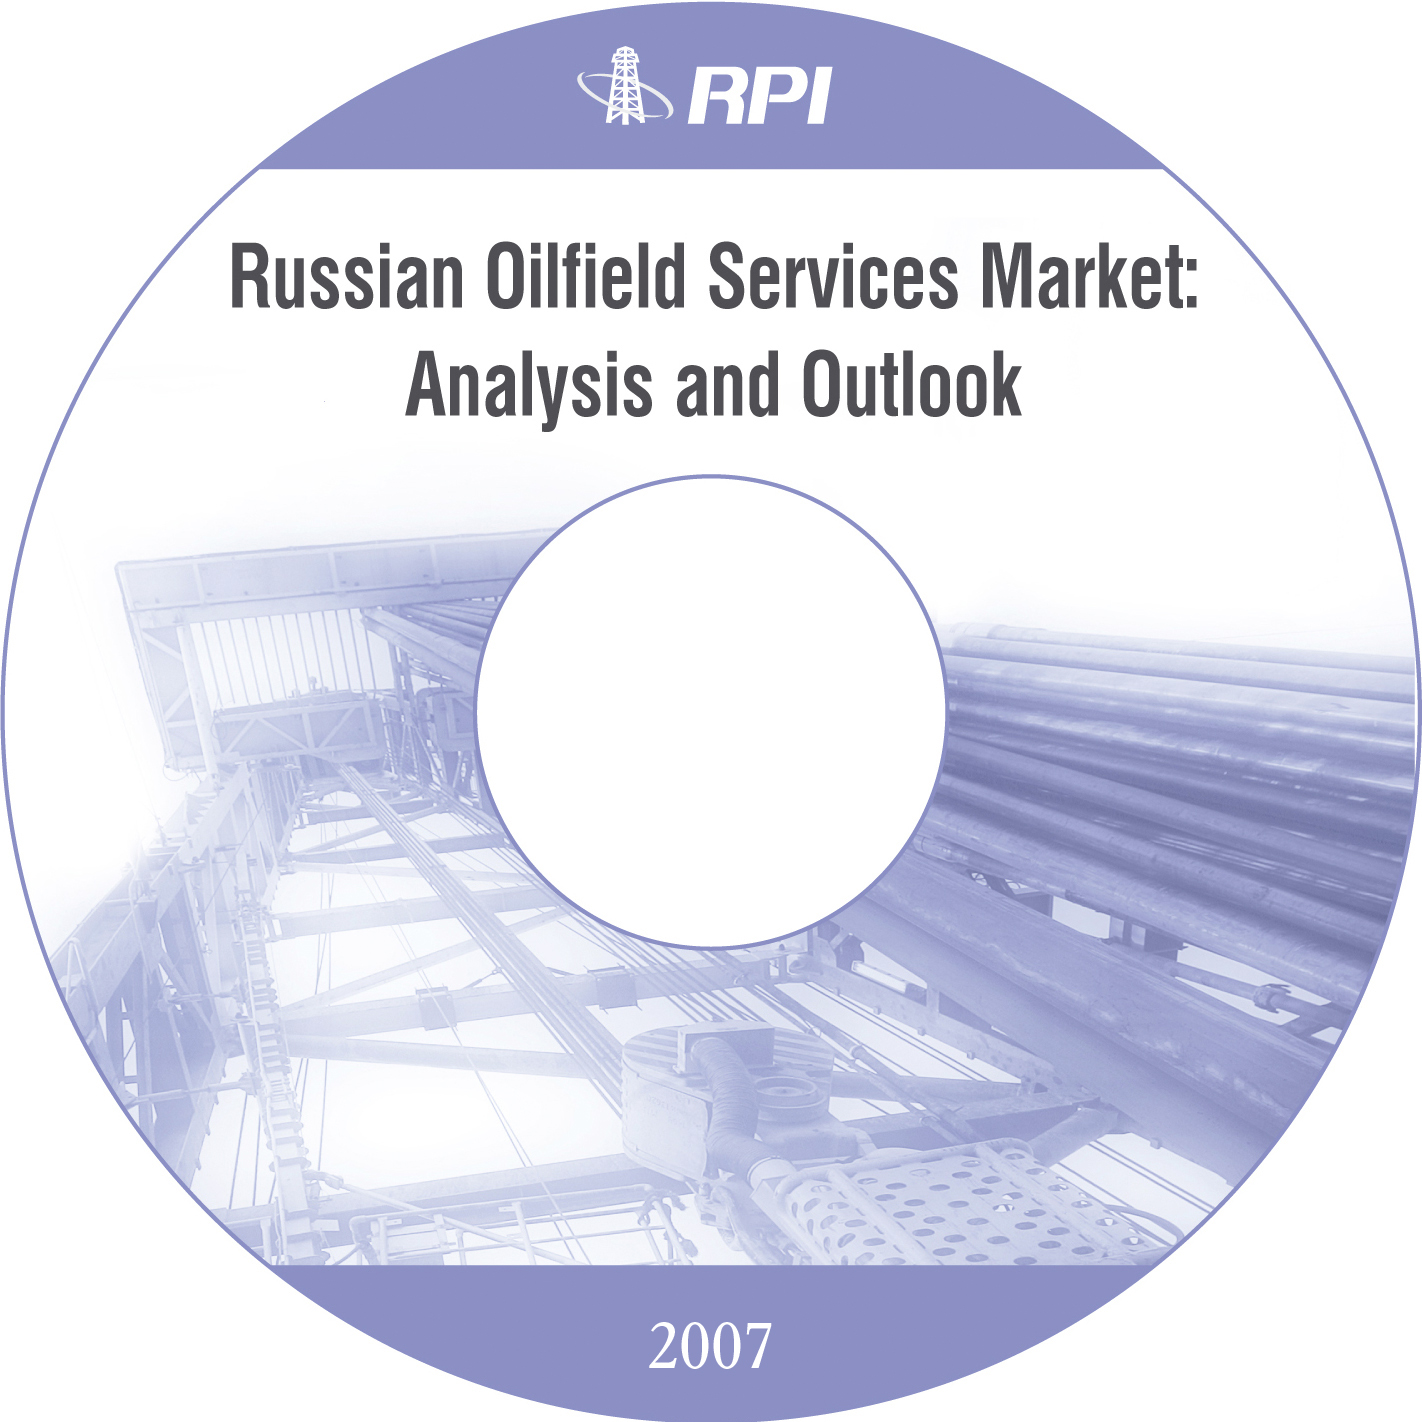 Russian Oilfield Services Market 2007: Analysis and Outlook